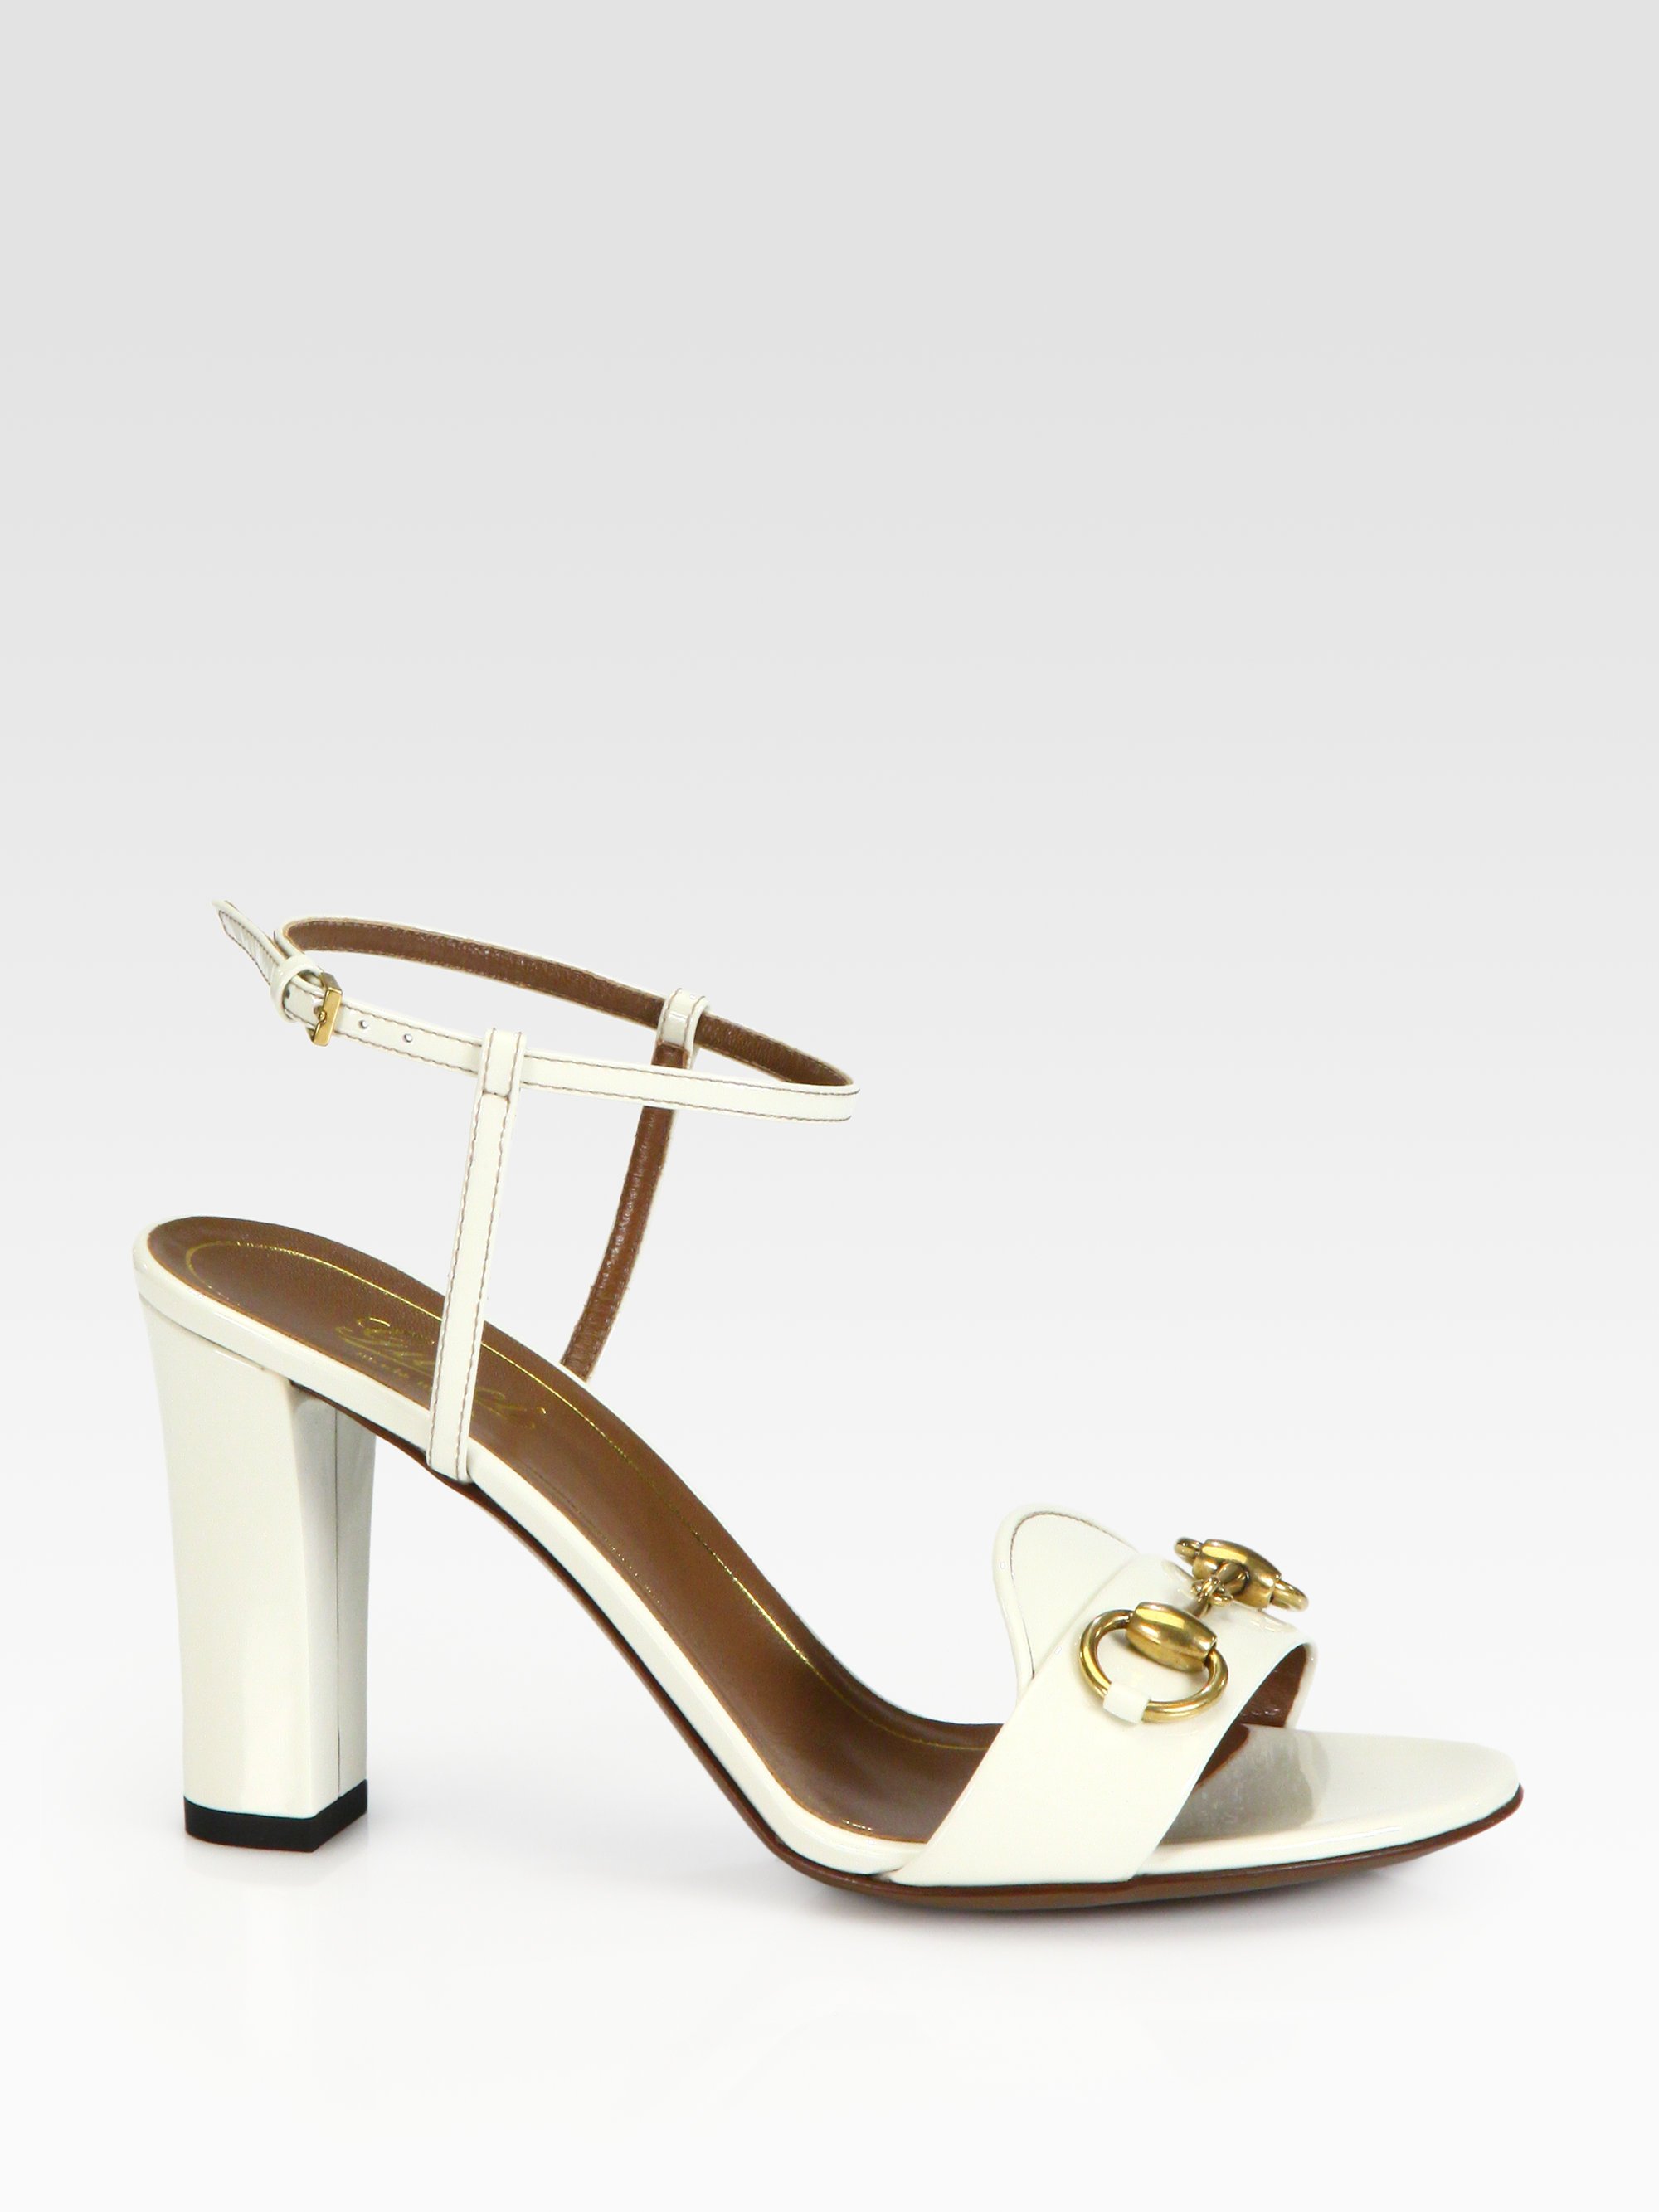 Gucci Patent Leather Horsebit Sandals in White | Lyst